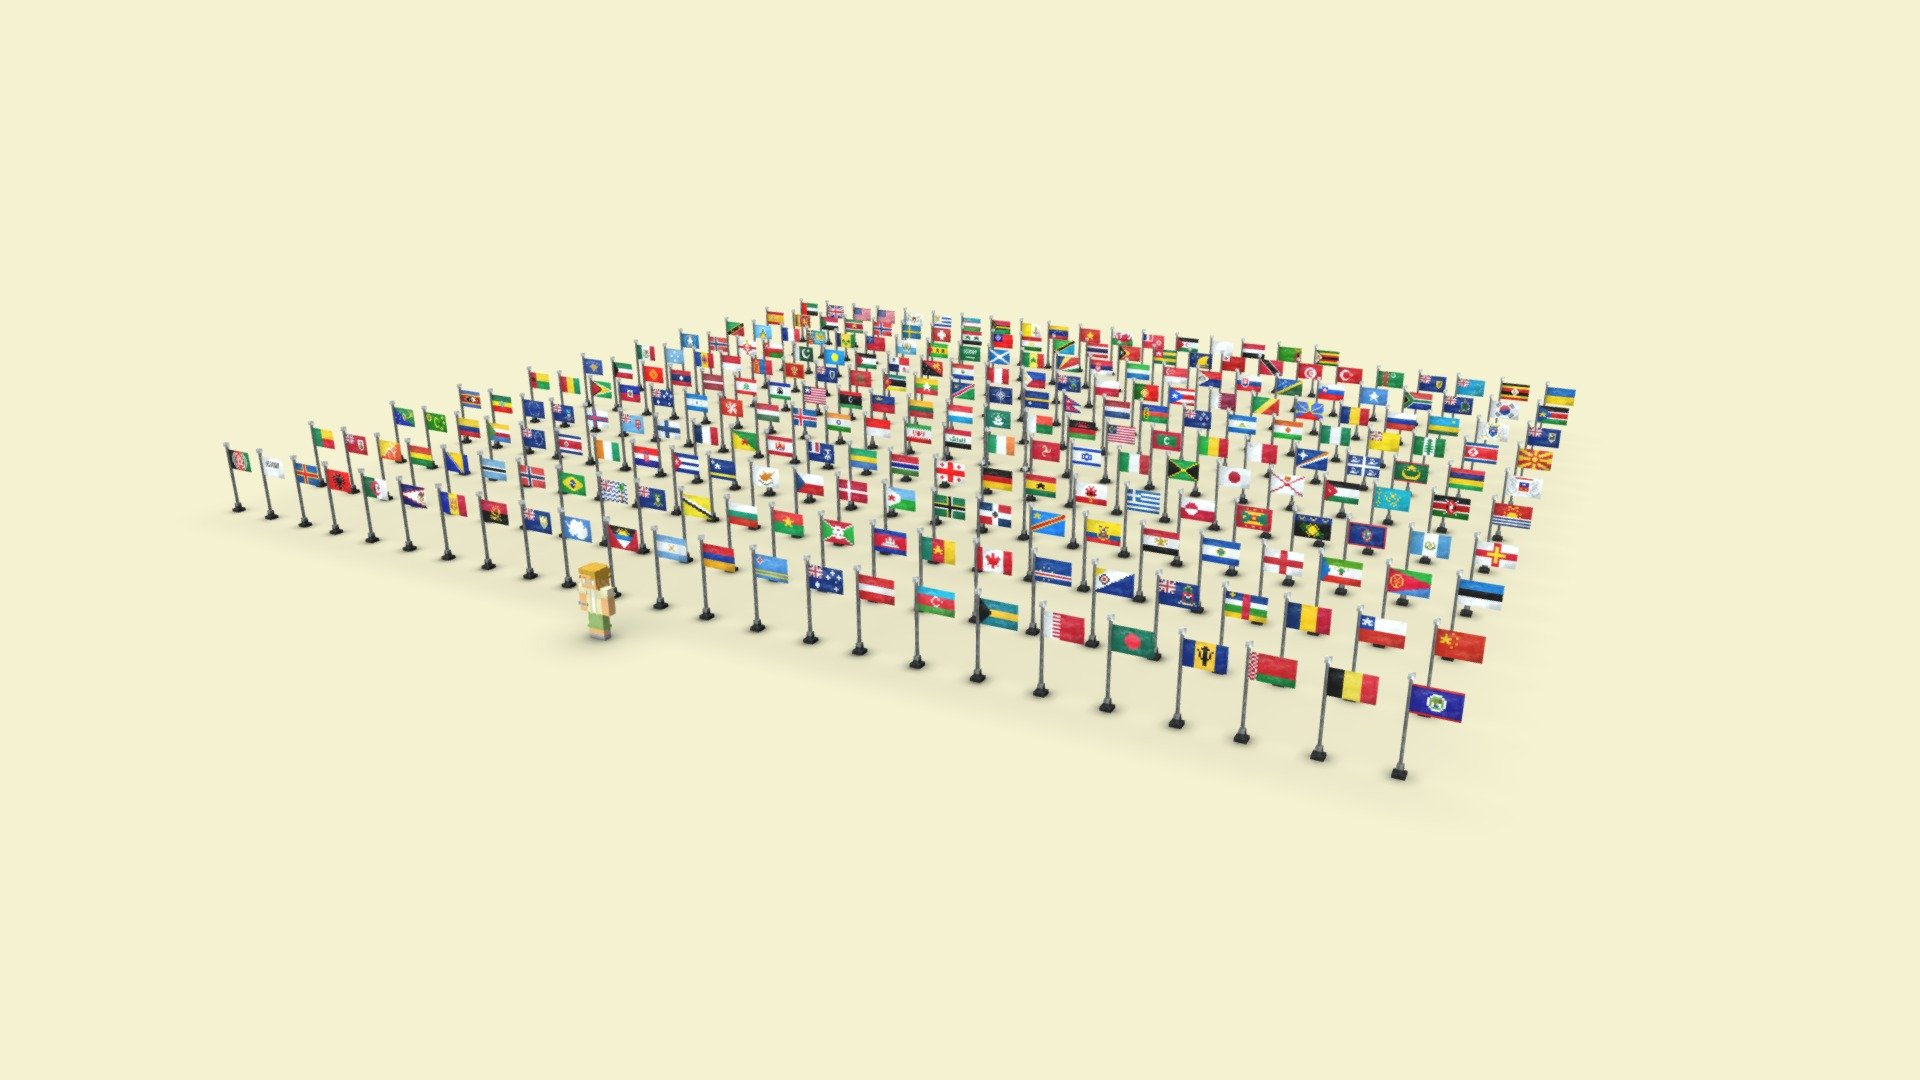 This is a collection of 258 flag models: all 254 recognized flags, NATO, European Union, Afganistan Variation, and a White flag.

These textures are not the native textures, I had to stitch them together to import into Sketchfab - they only allow 100 materials 3d model